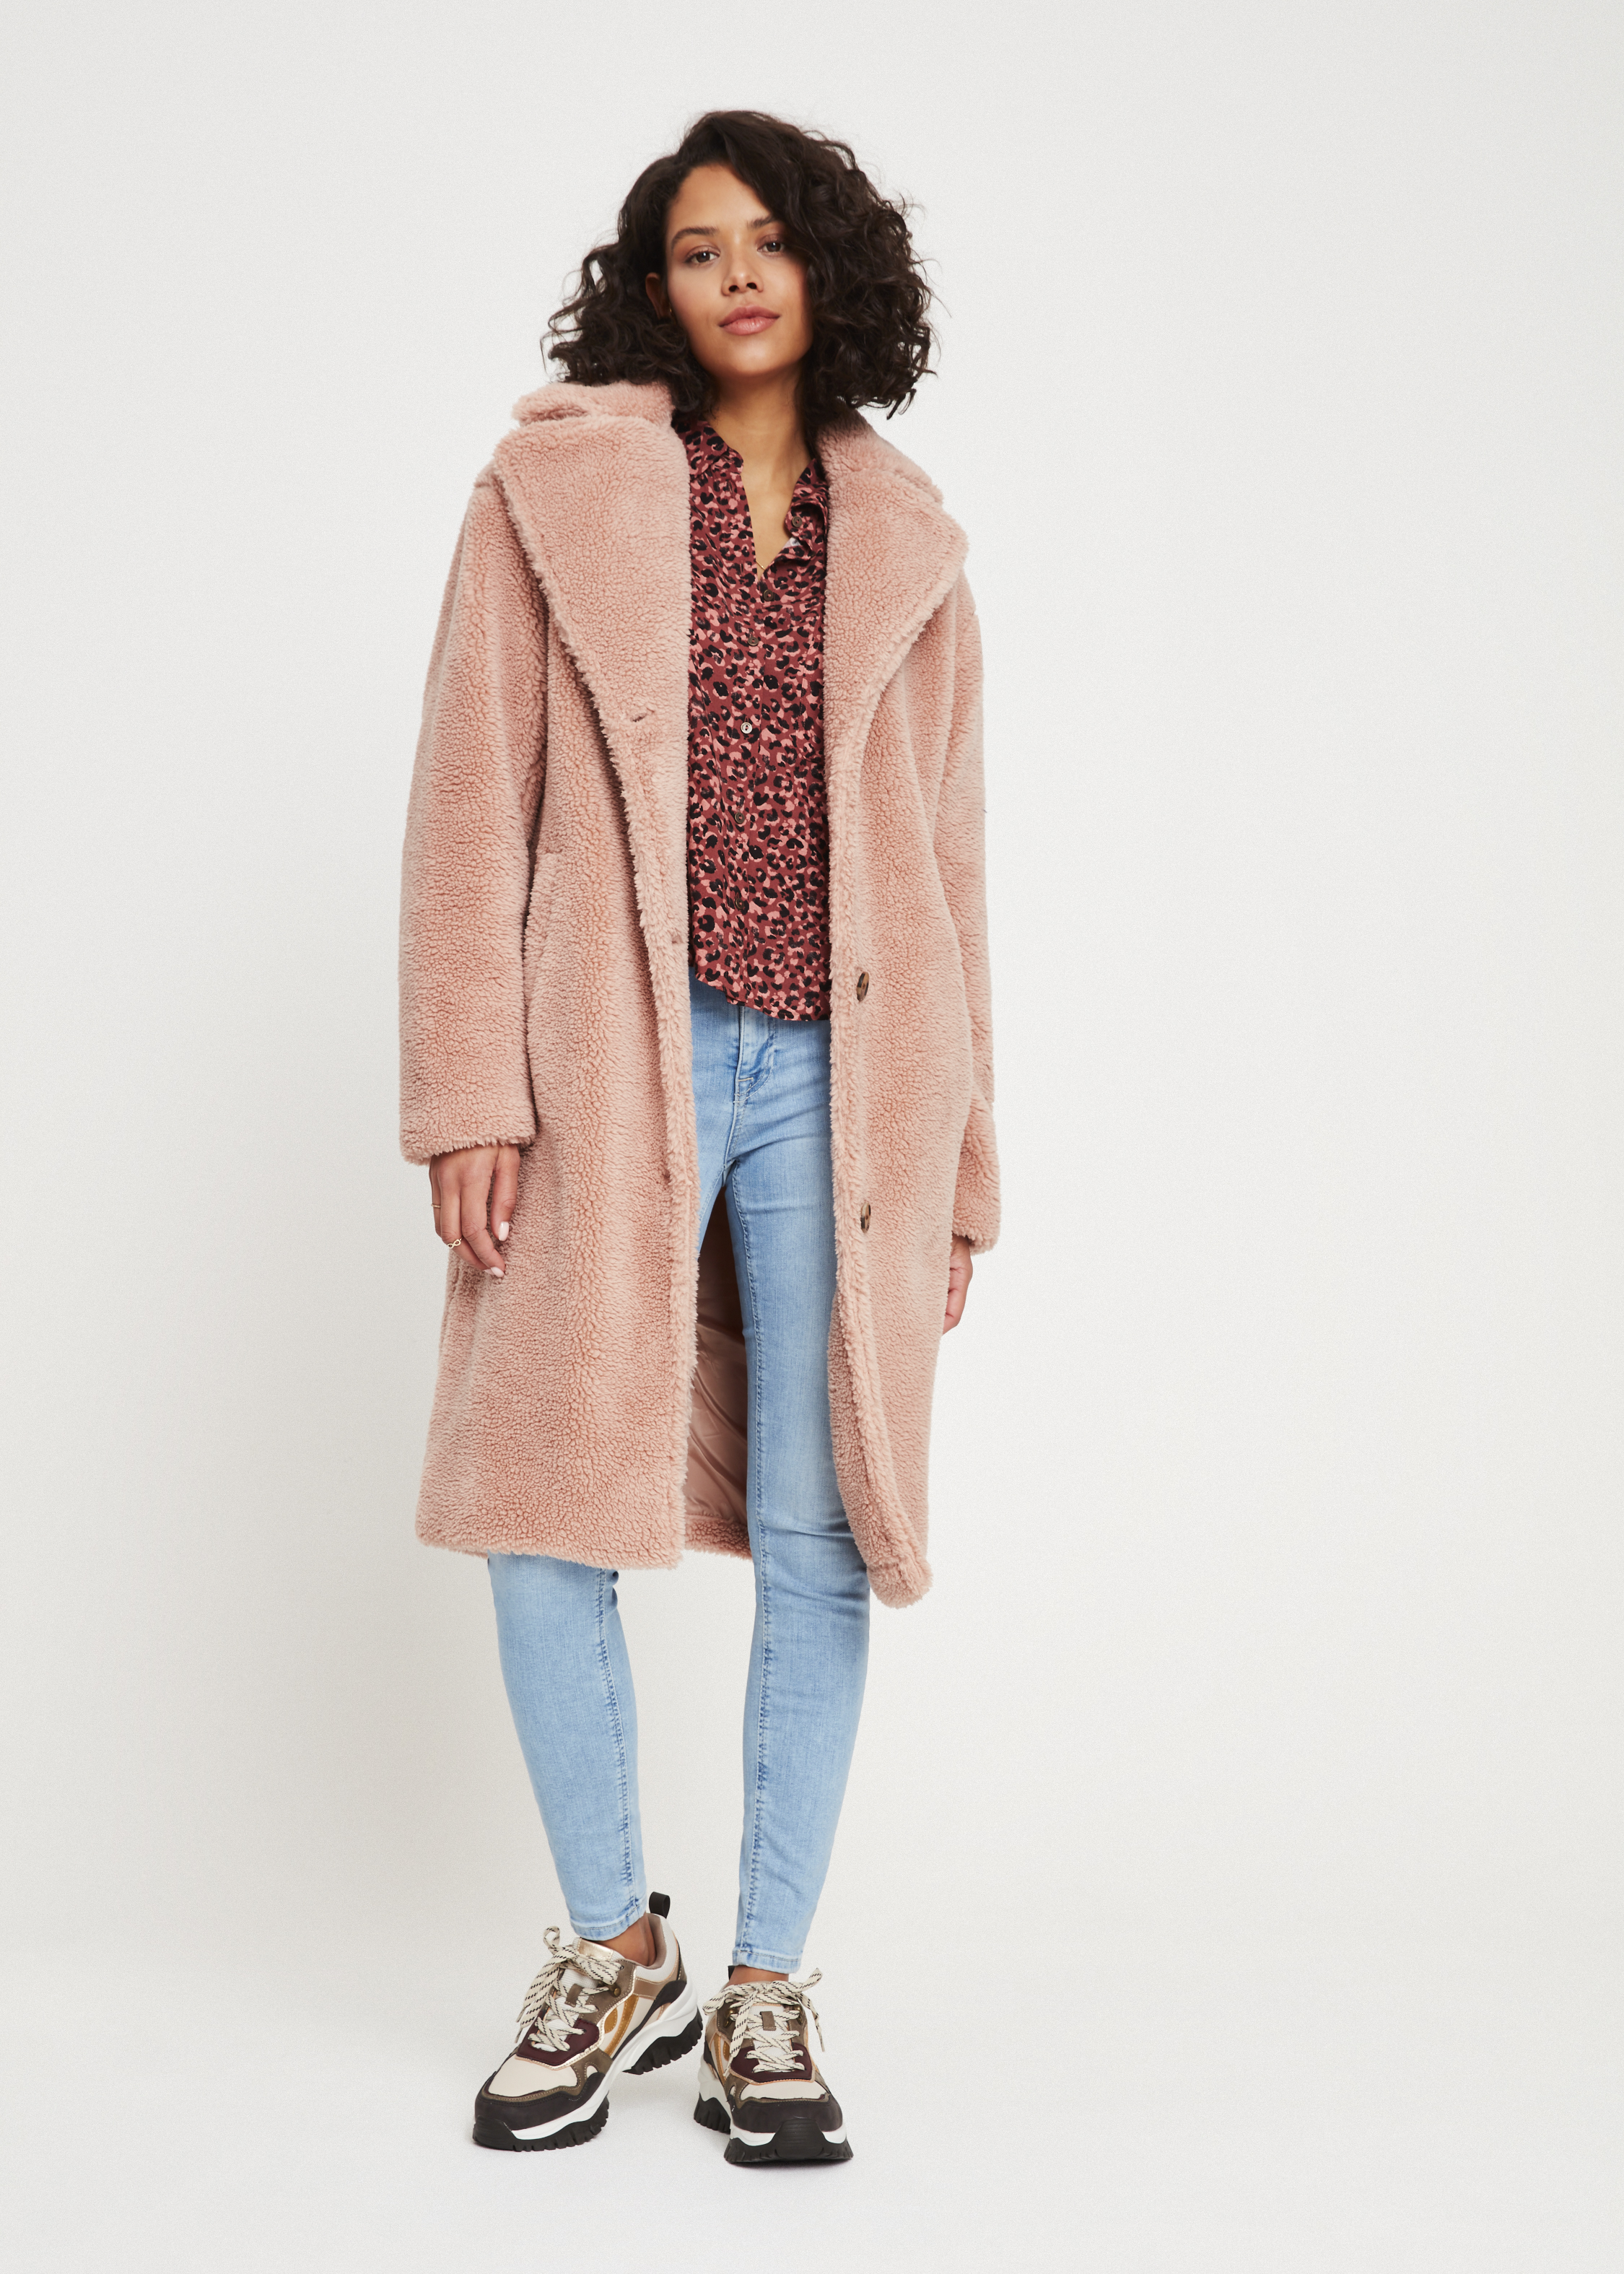 Voetzool Salie Raad teddy coat the sting - OFF-62% >Free Delivery